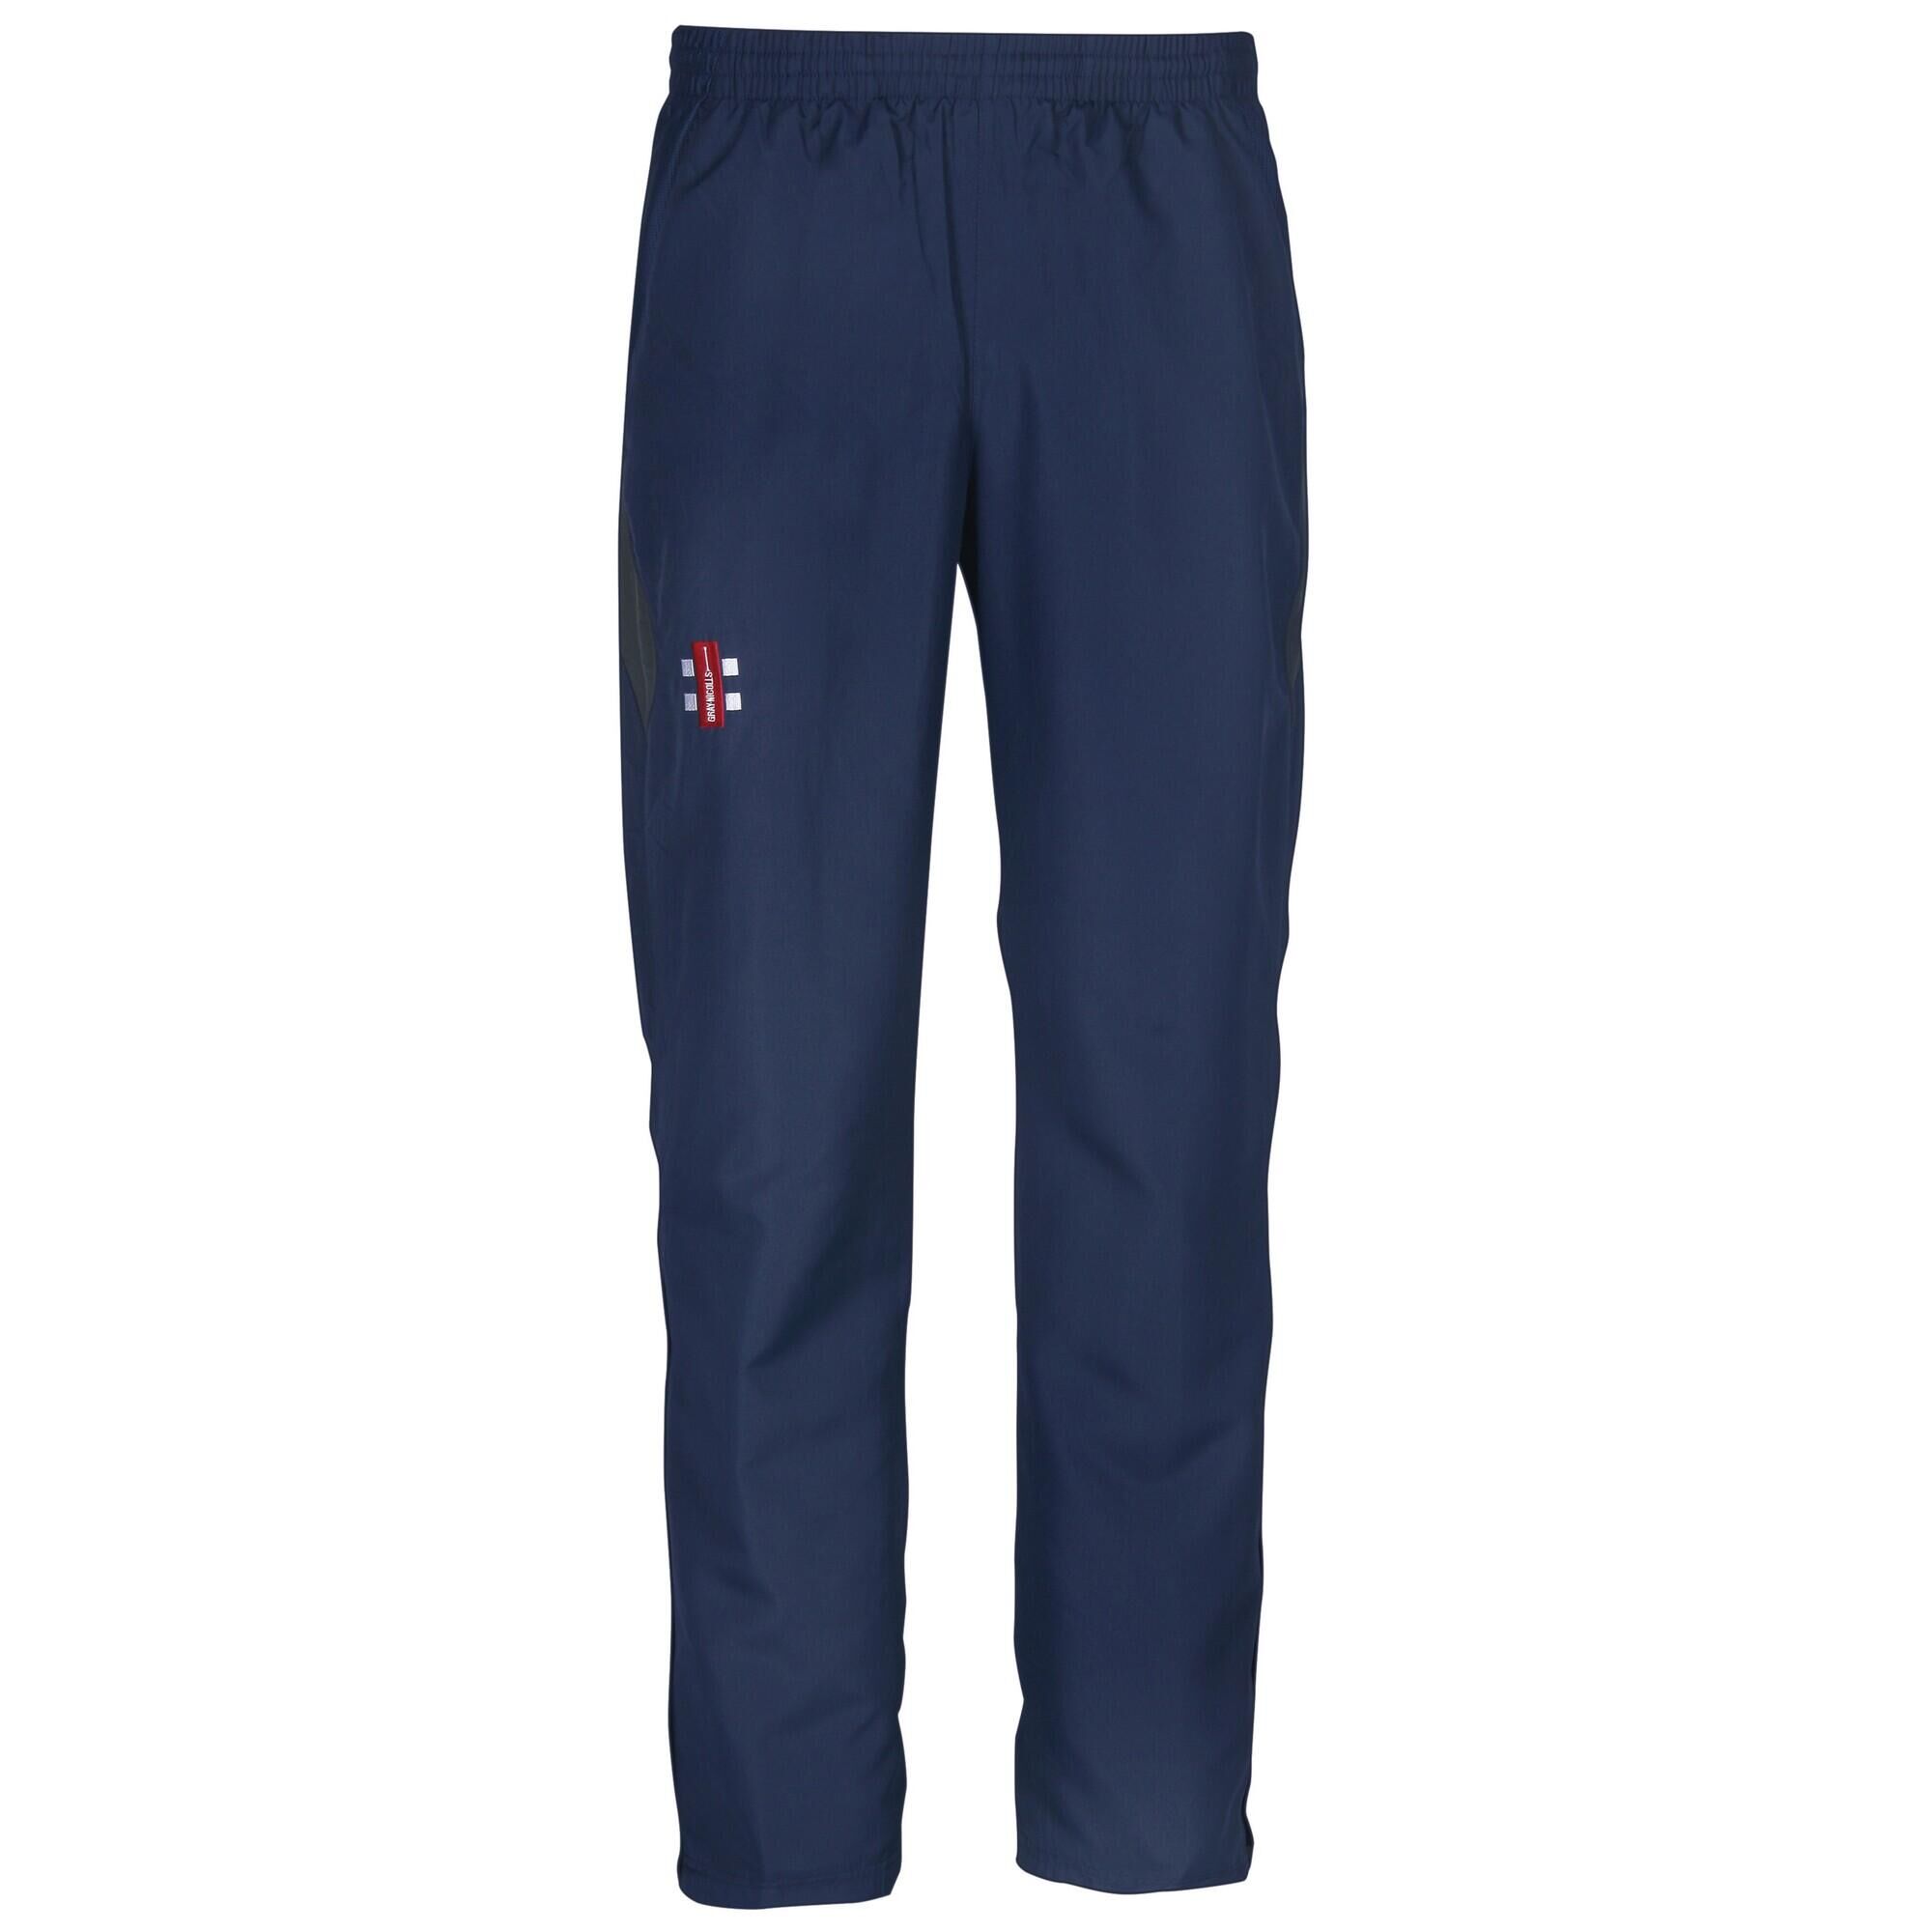 GRAY-NICOLLS Adults Unisex Storm Track Trousers (Navy)